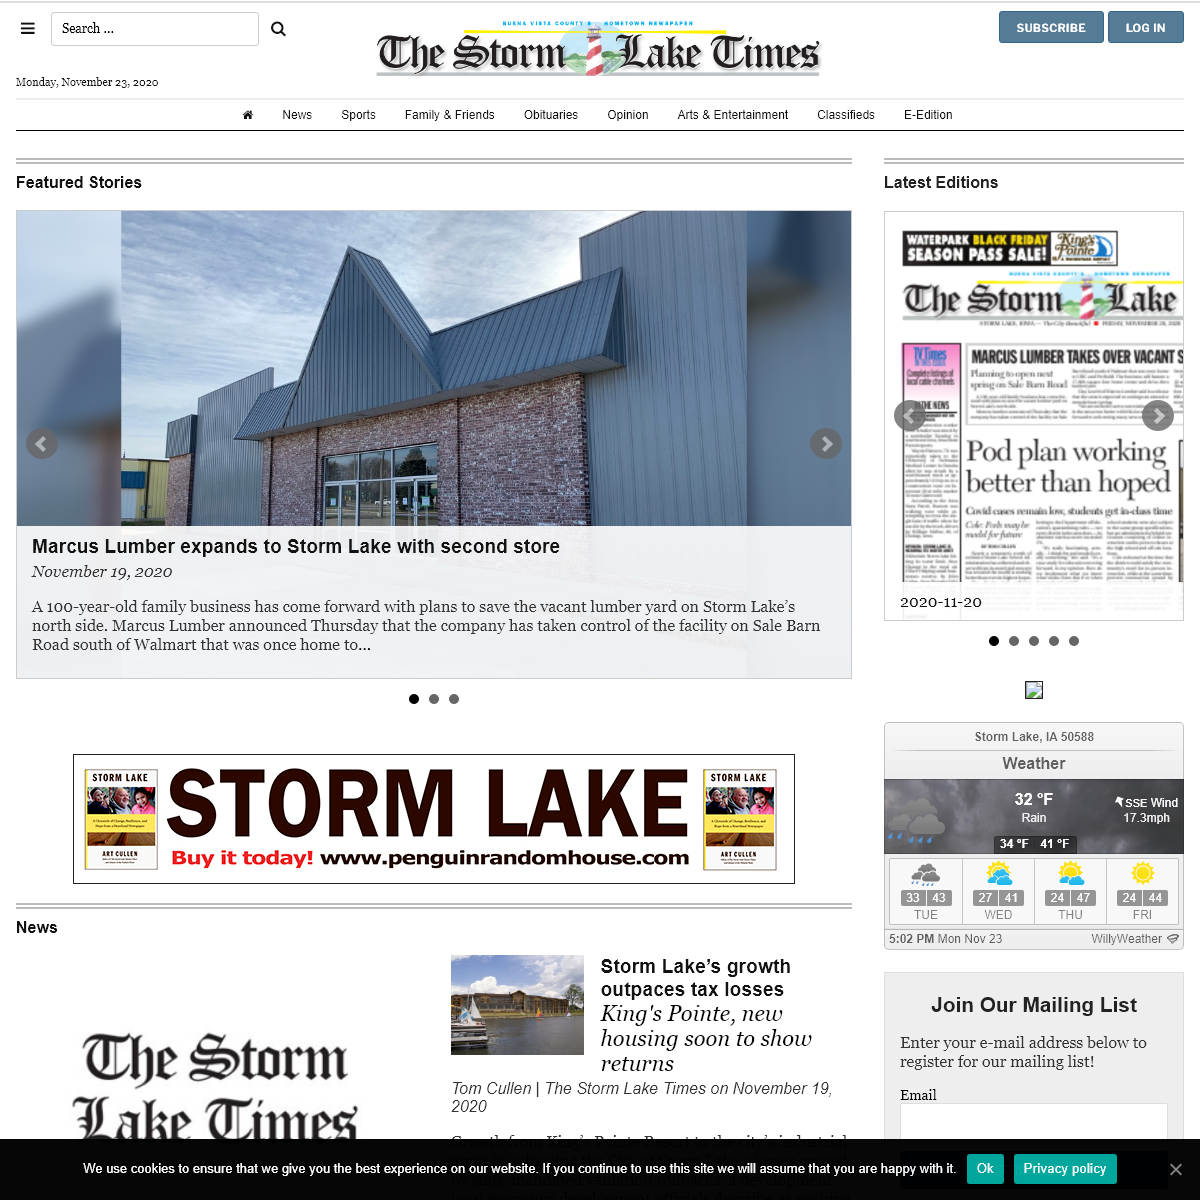 A complete backup of stormlake.com